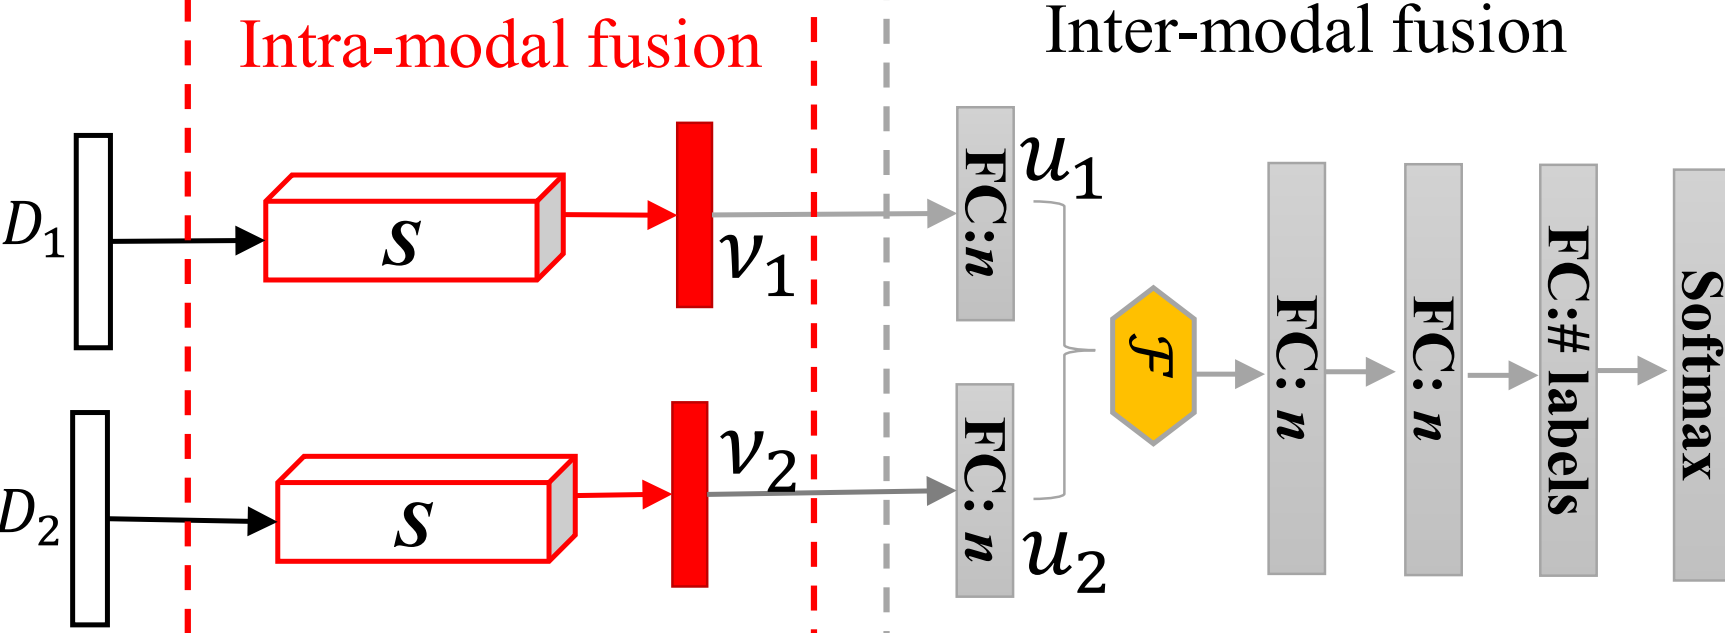 An Association-Based Fusion Method for Multi-Modal Classification